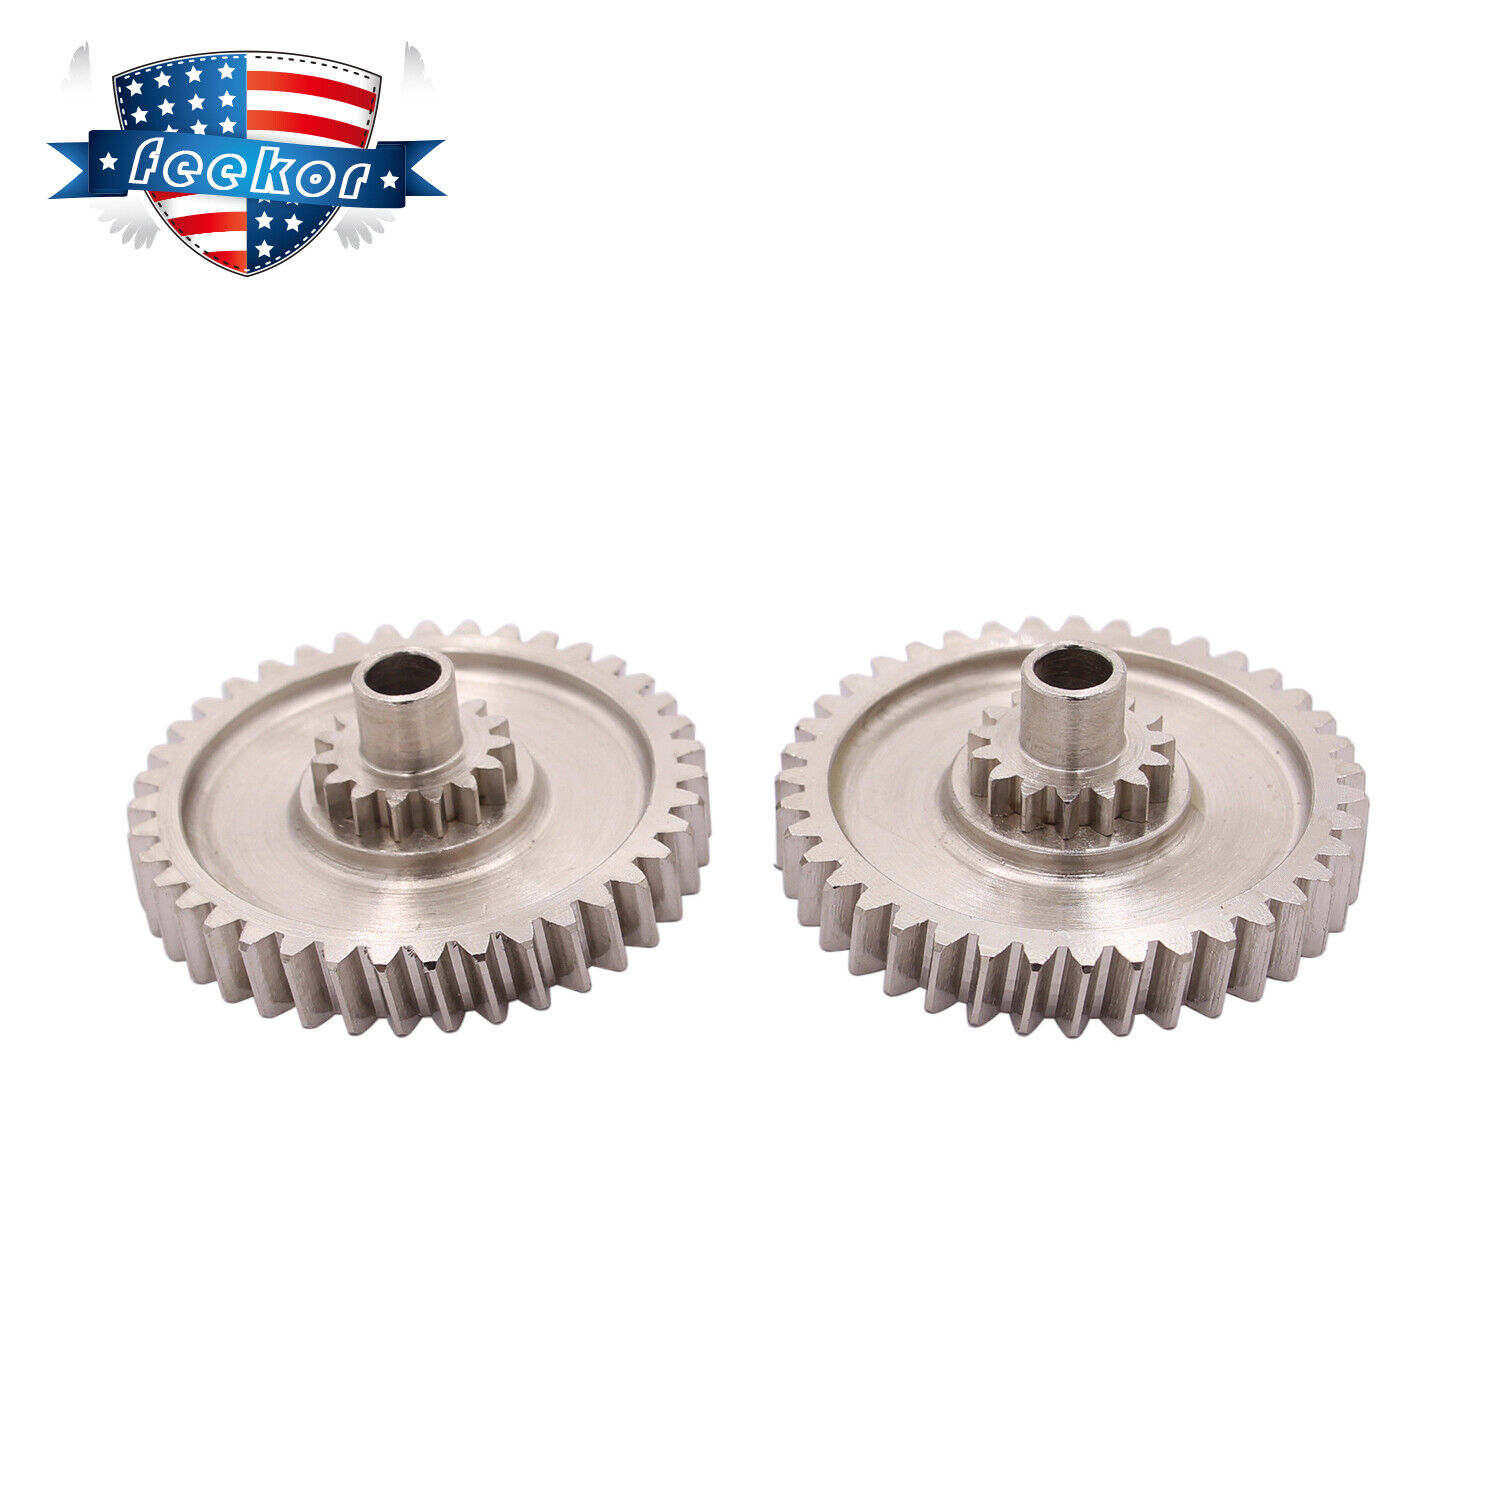 Steel Convertible Top Transmission Gear LH&RH Fits for 1997-2012 Porsche Boxster